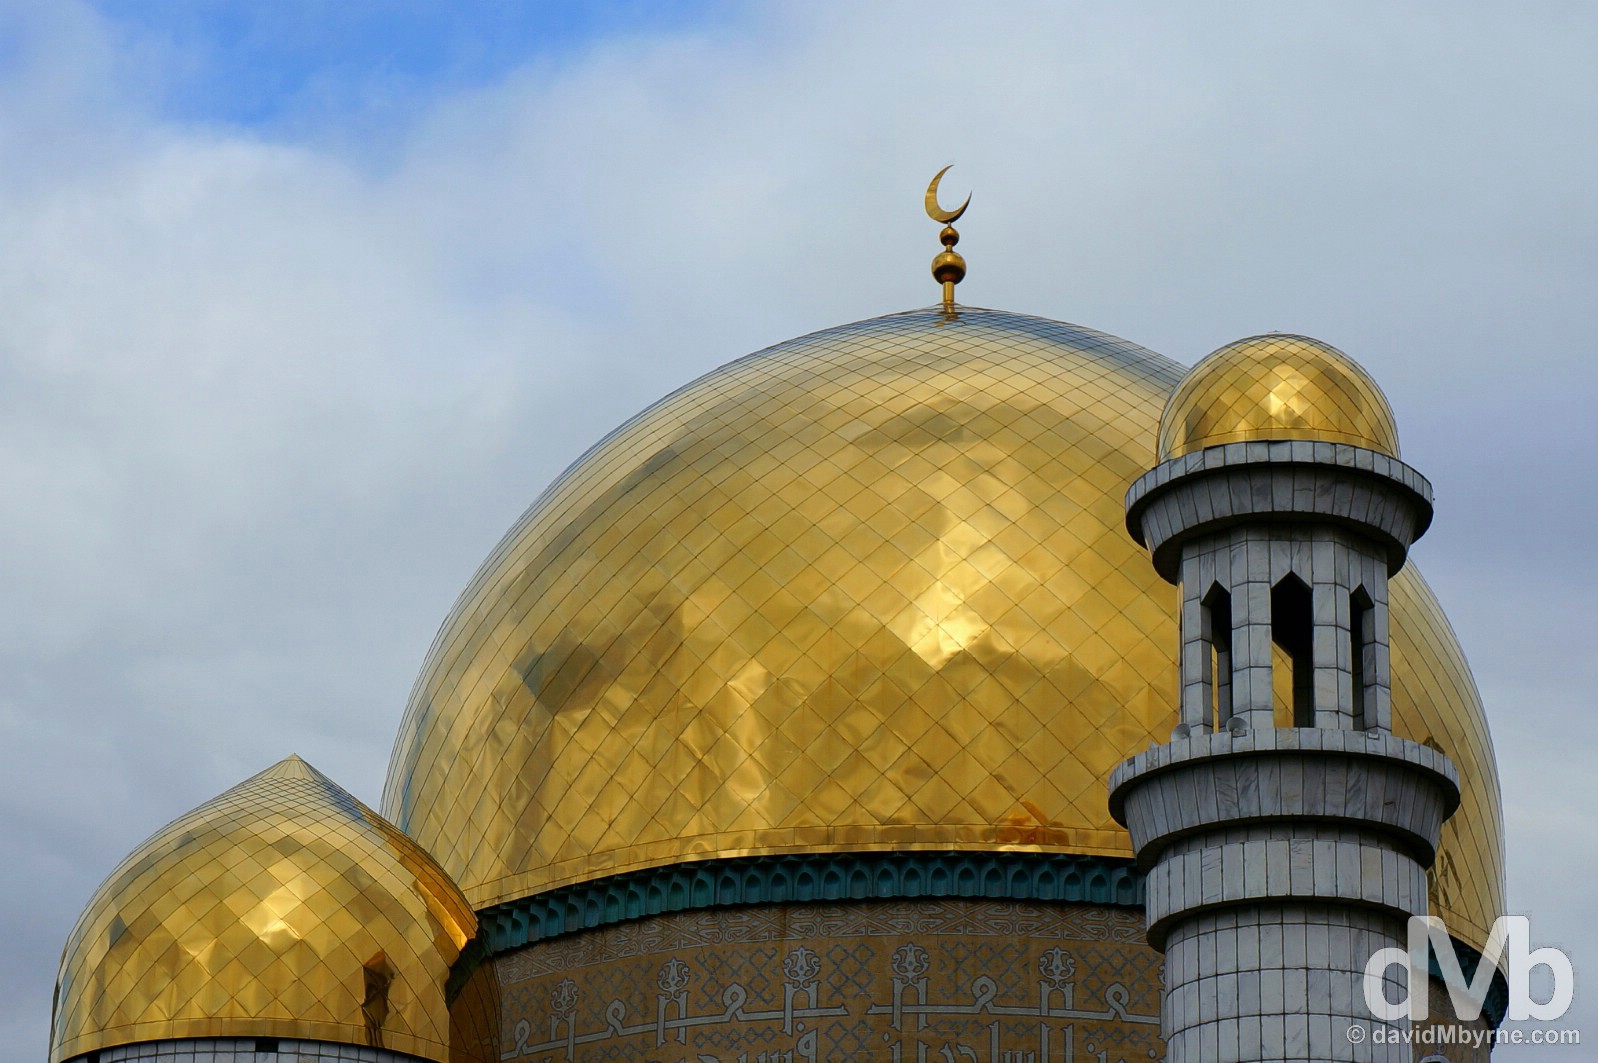 Golden domes of the Central Mosque in Almaty, Kazakhstan. February 13, 2015.